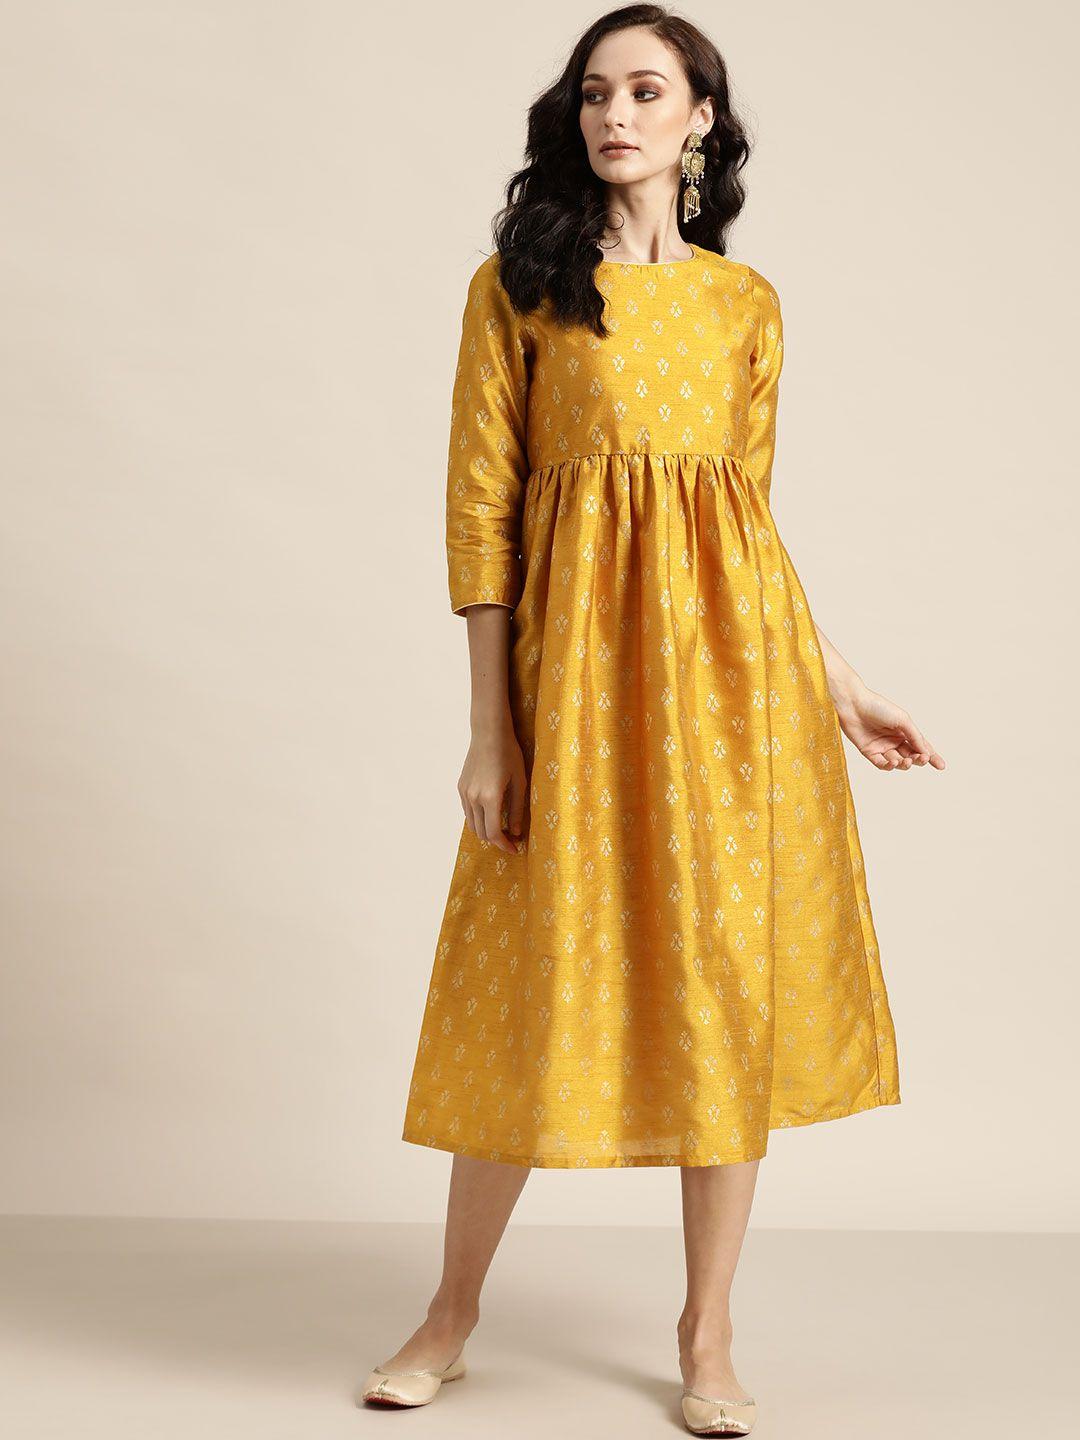 shae-by-sassafras-mustard-yellow-&-off-white-floral-a-line-midi-dress